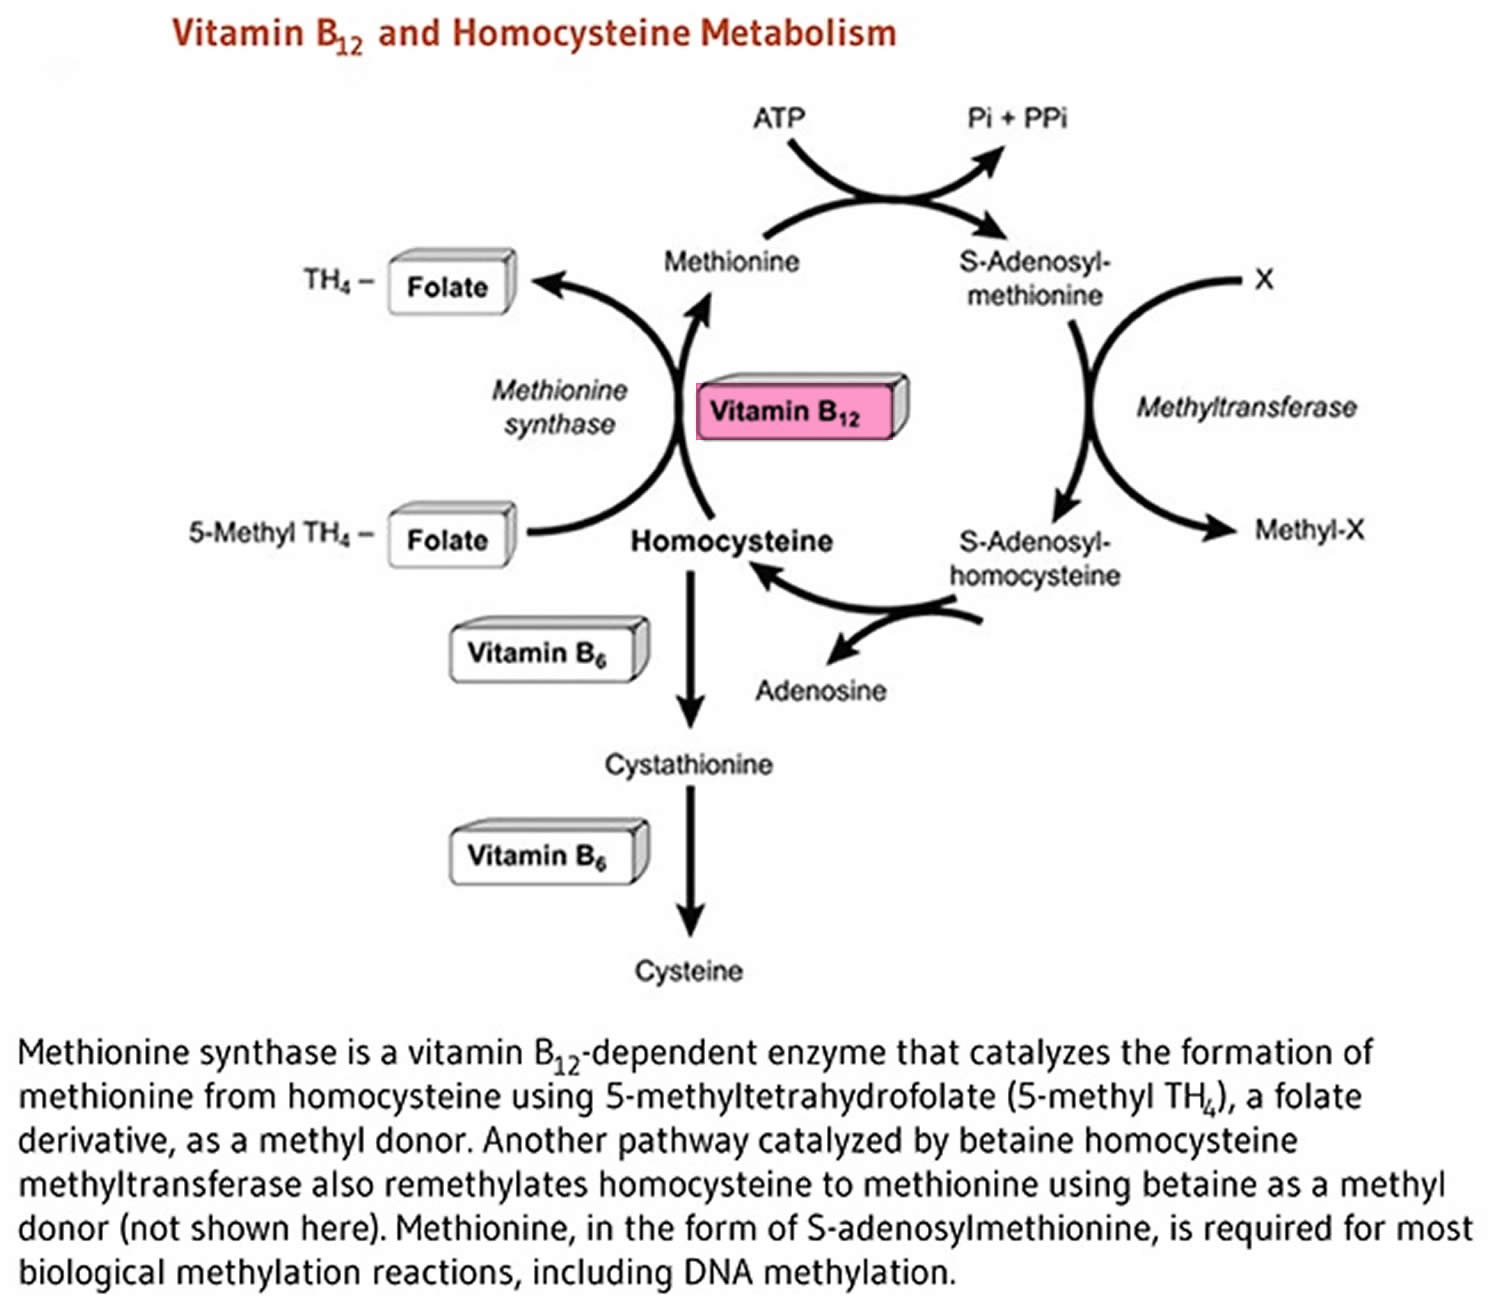 Vitamin B12 functions as a cofactor for methionine synthase